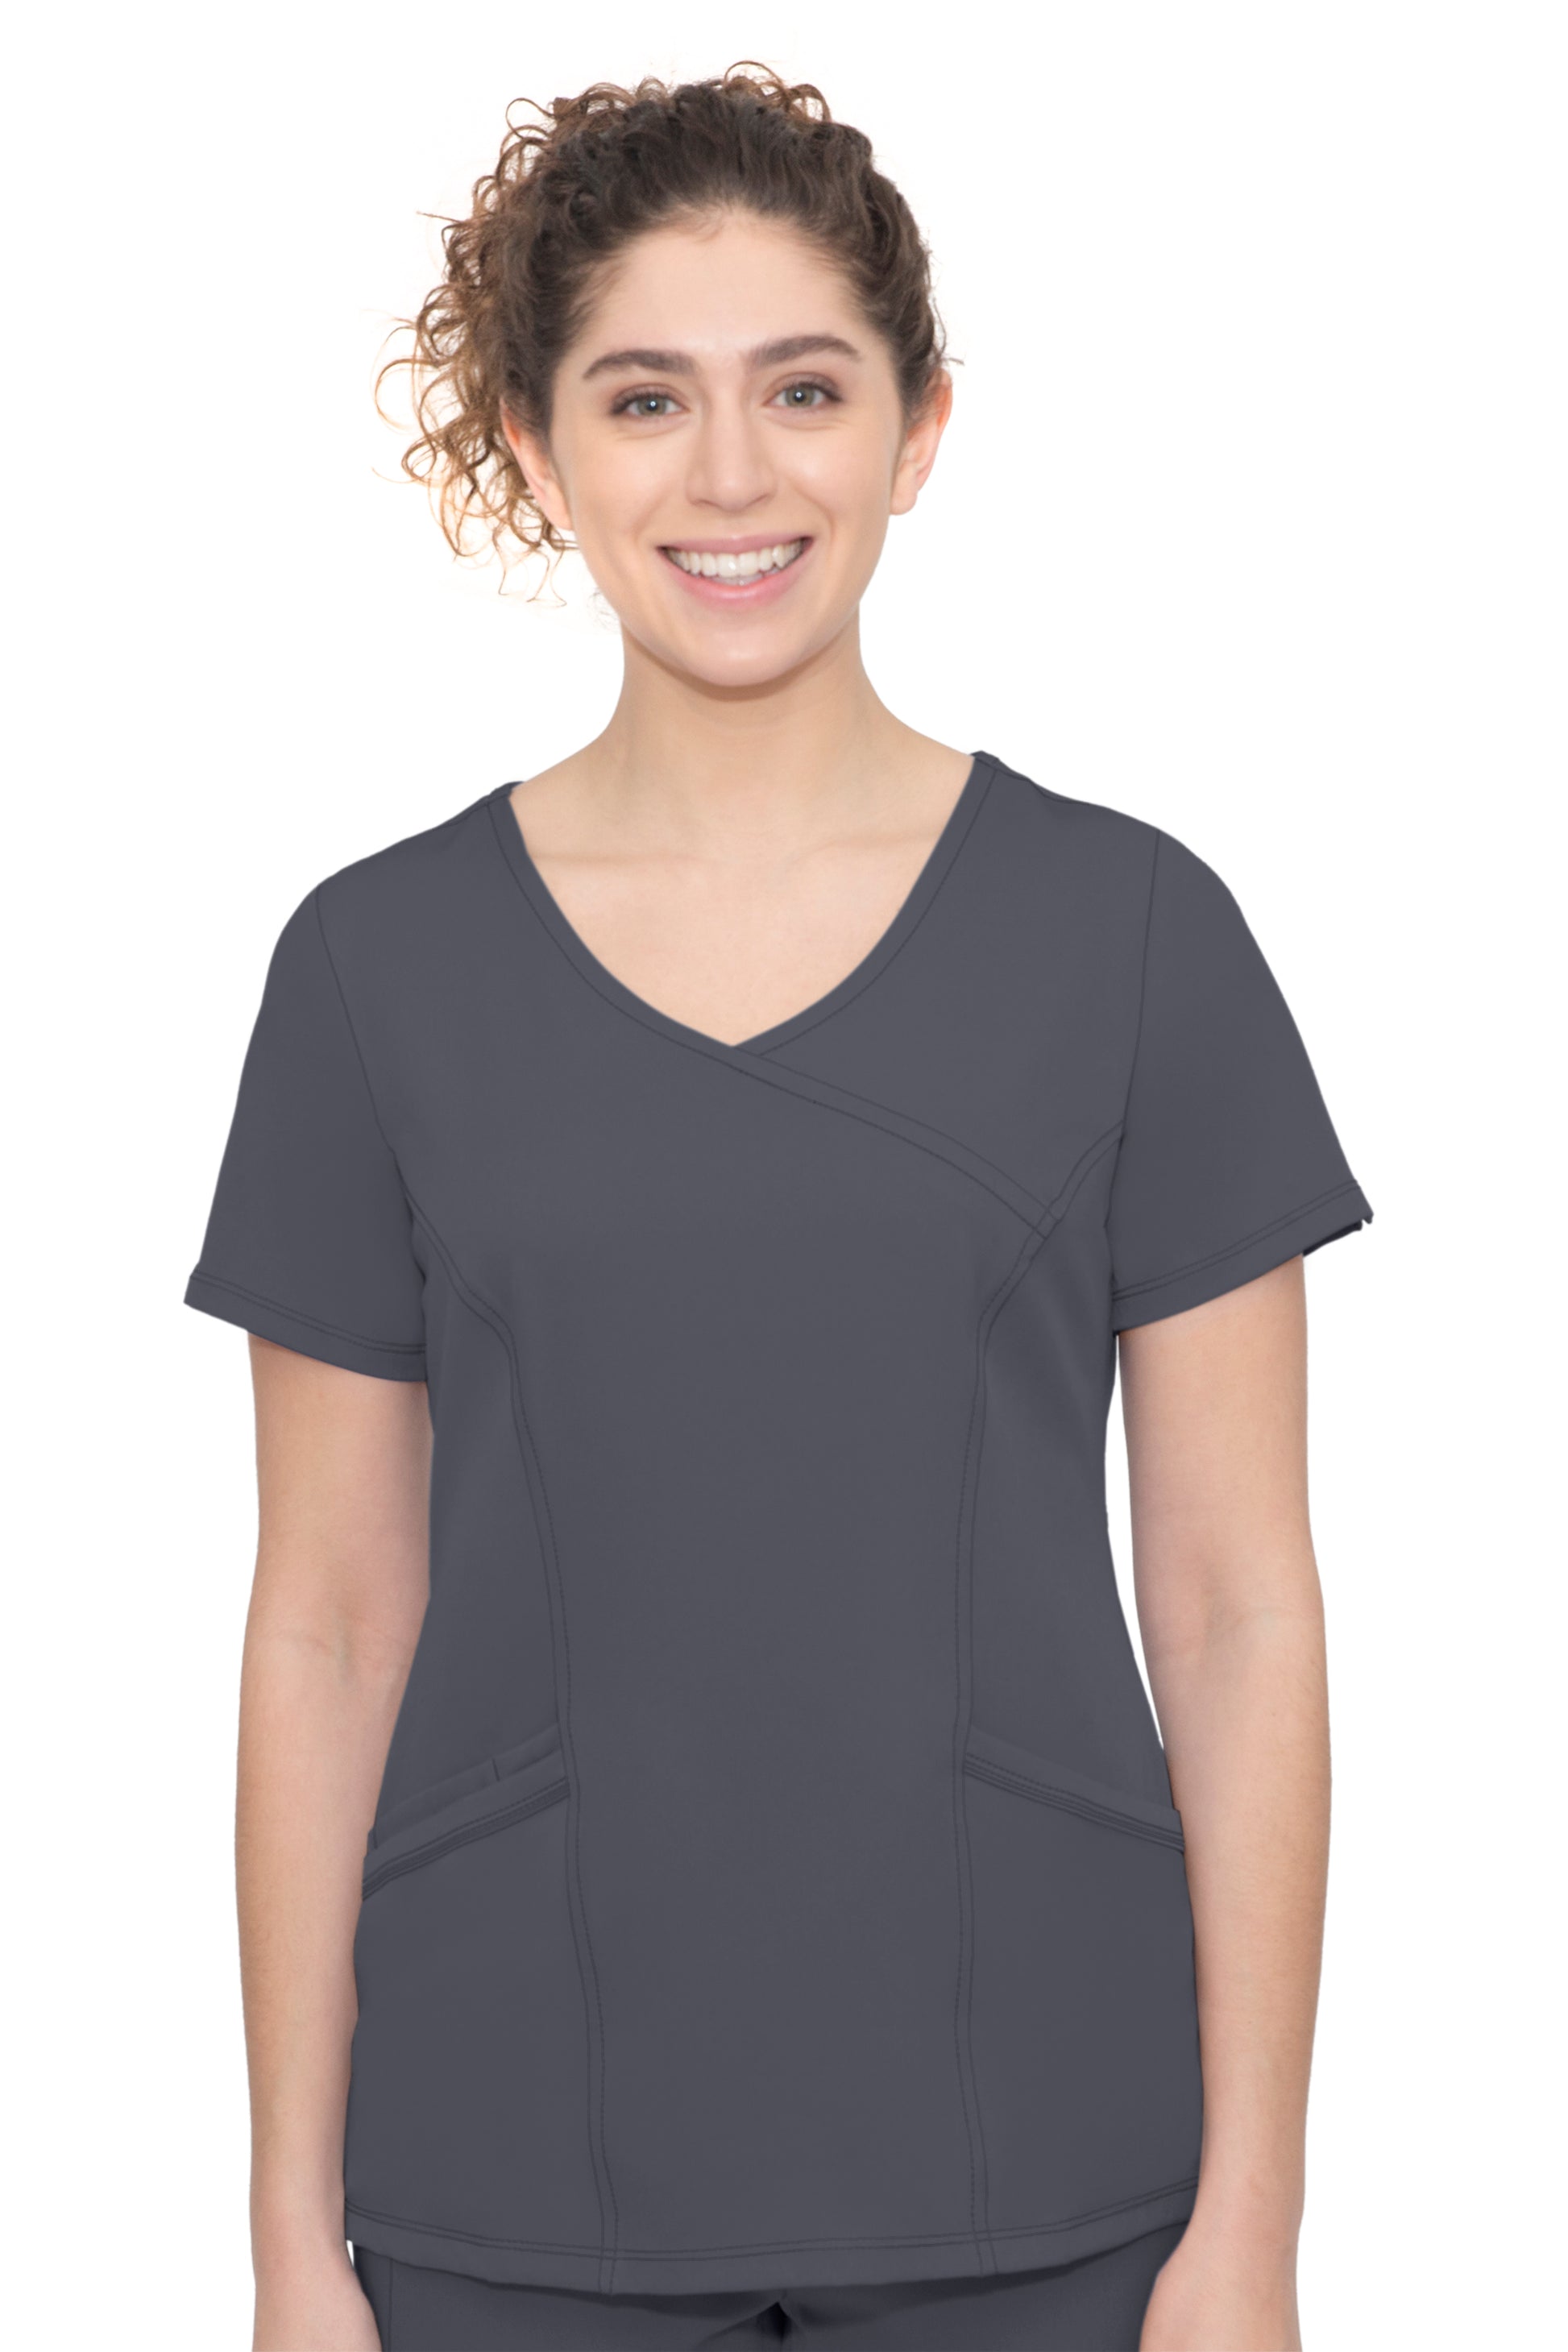 Healing Hands HH Works 2525 Madison Women's Top Pewter